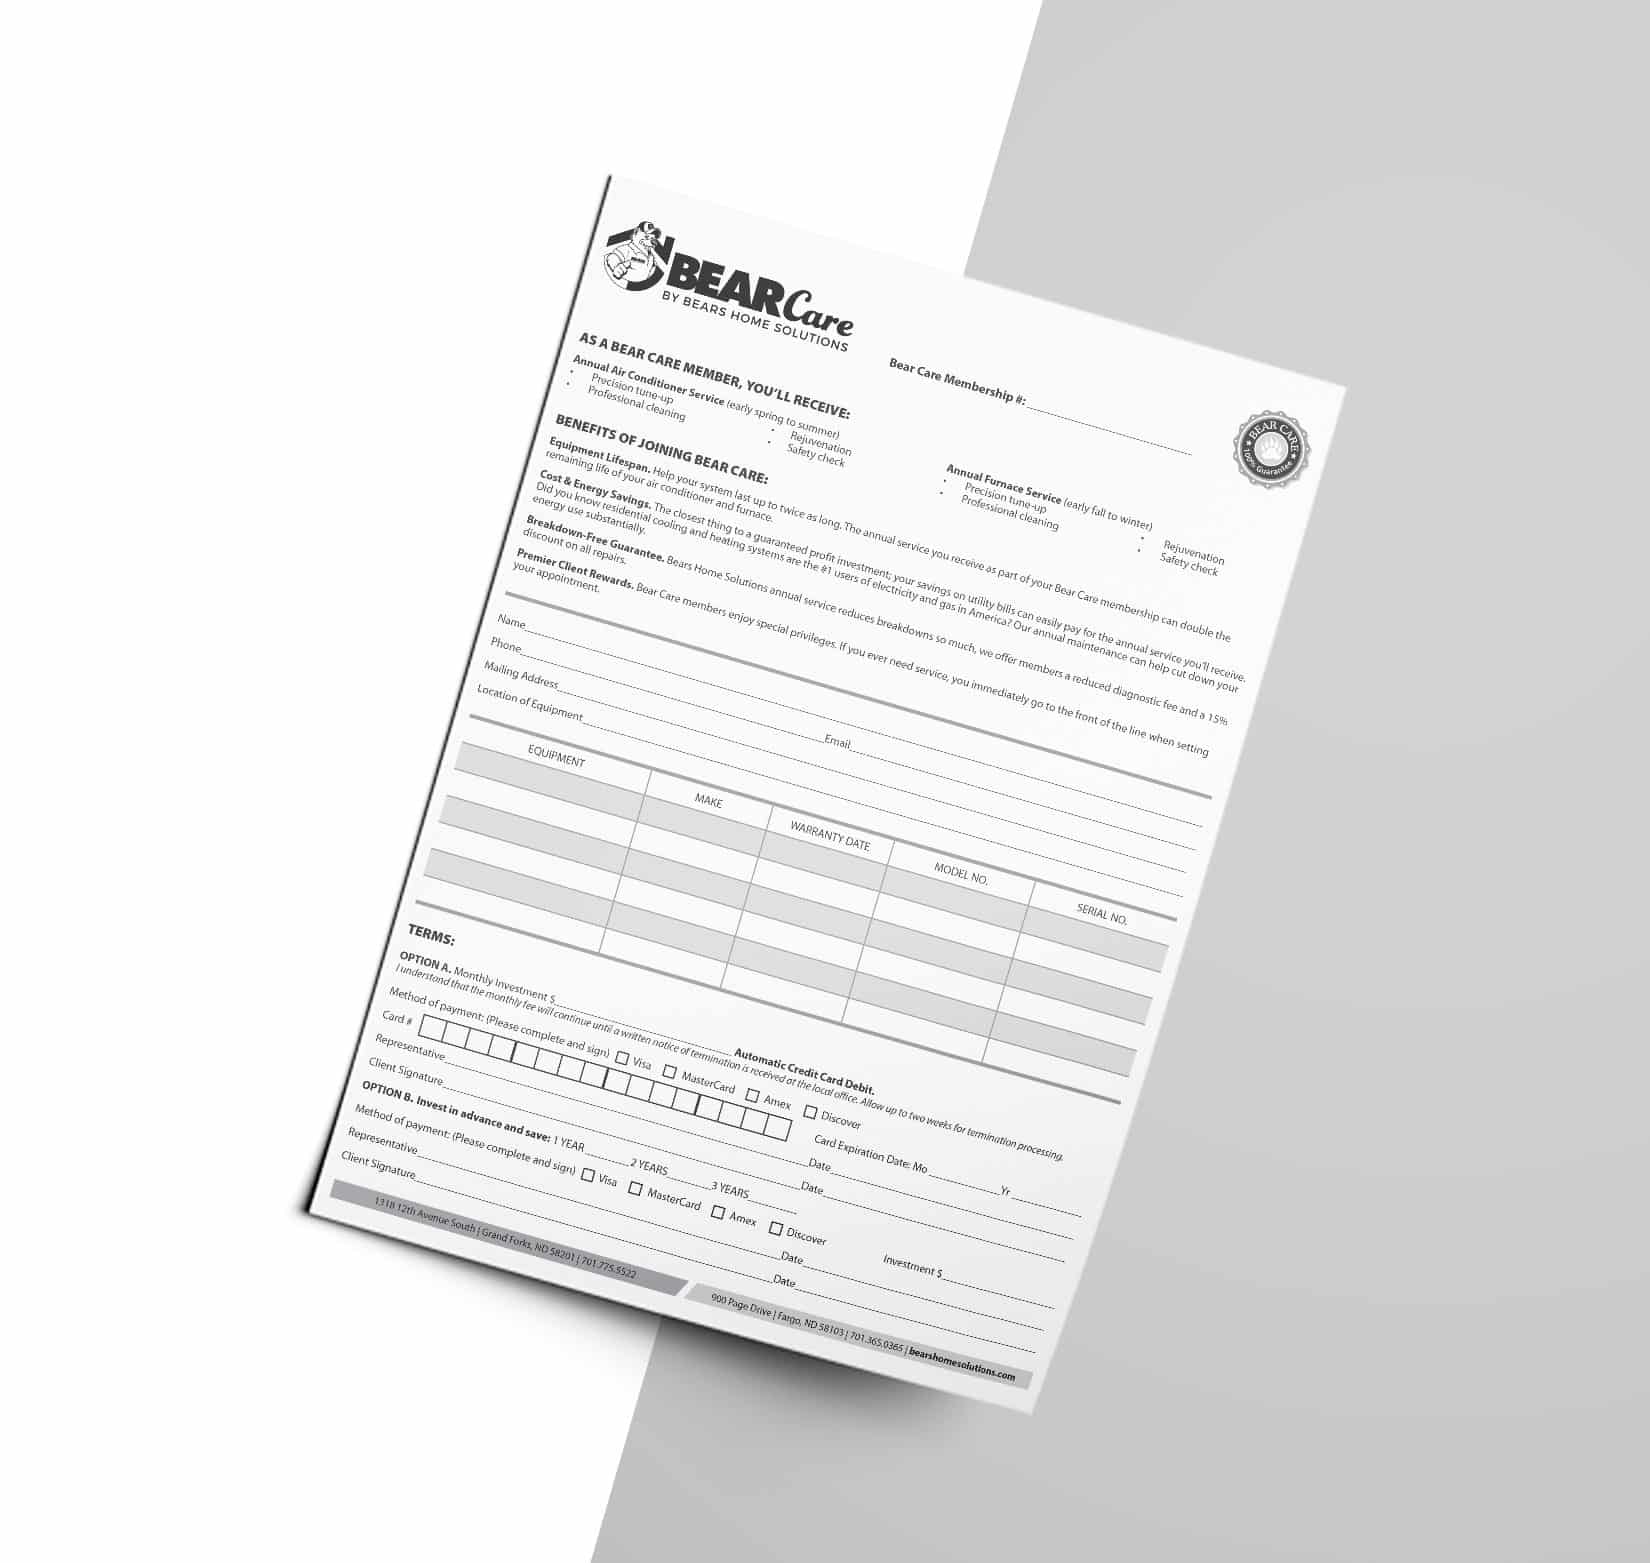 A maintenance form printed in black and white for Bears Home Solutions